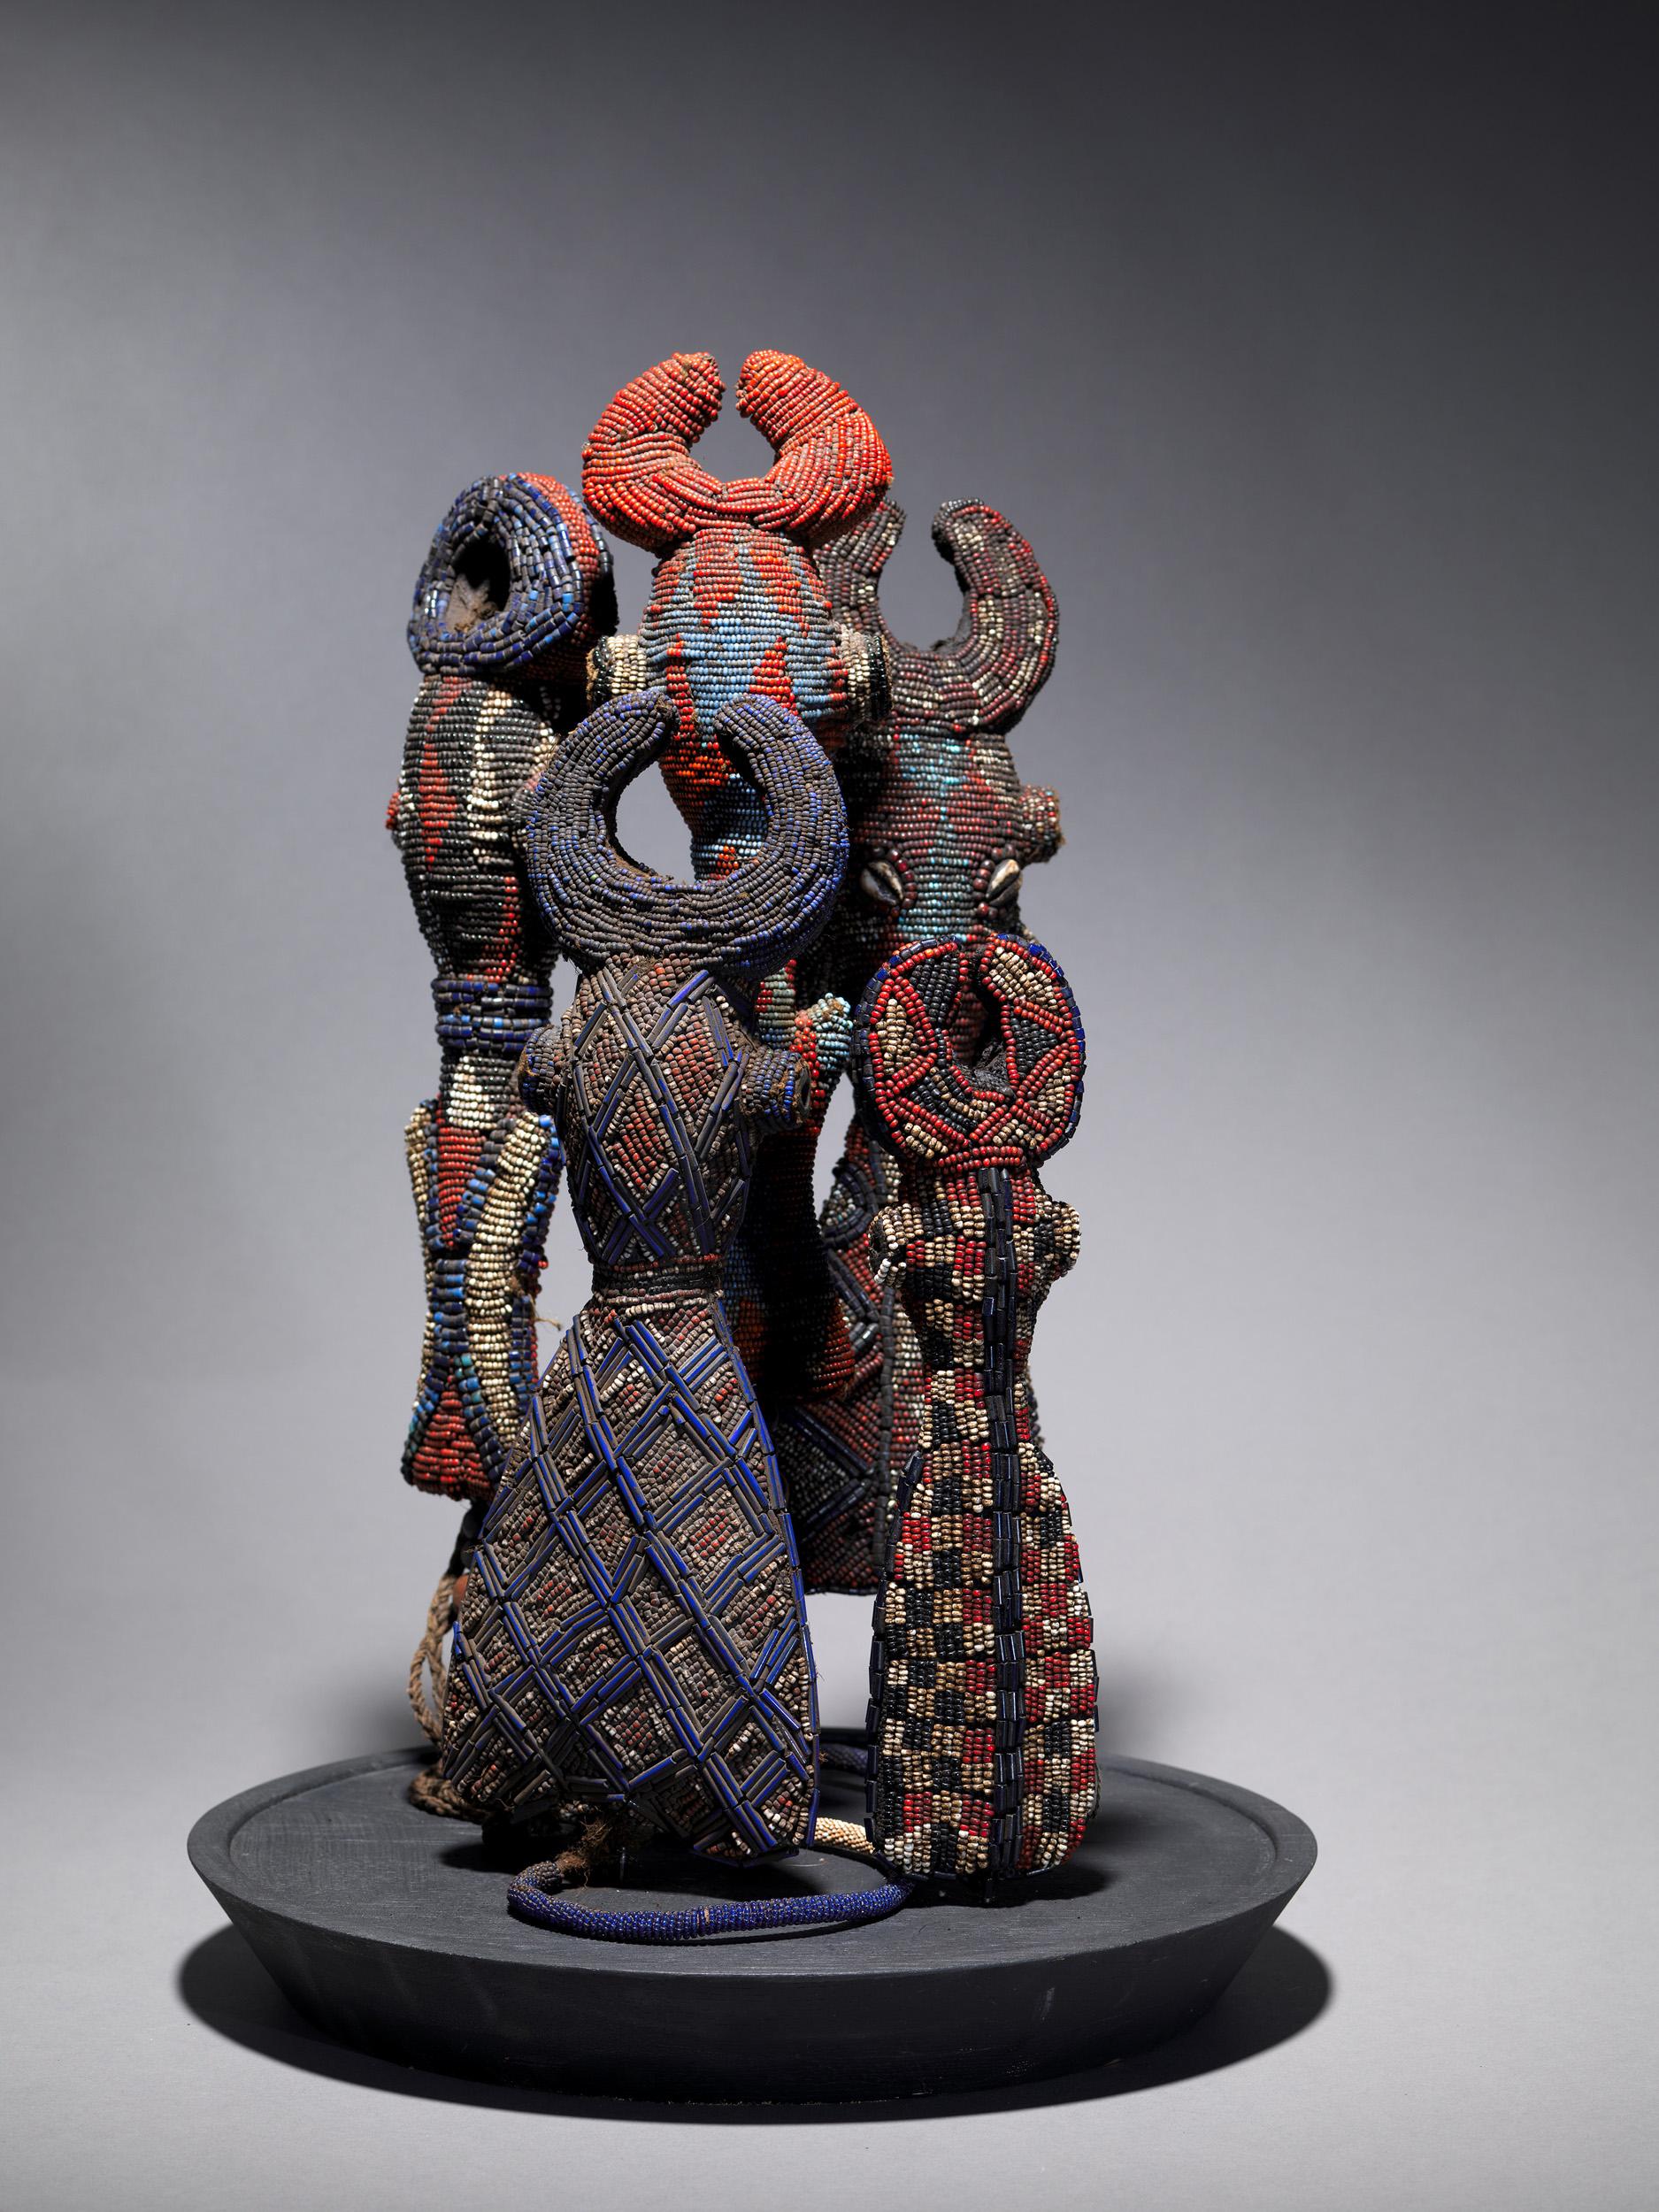 Five ceremonial beaded flutes or whistles from the Cameroon grasslands. They come in various geometric forms, taking on the shape of a hollowed, stylized figure that combines human and animal features. Most have a hole or some device to attach a